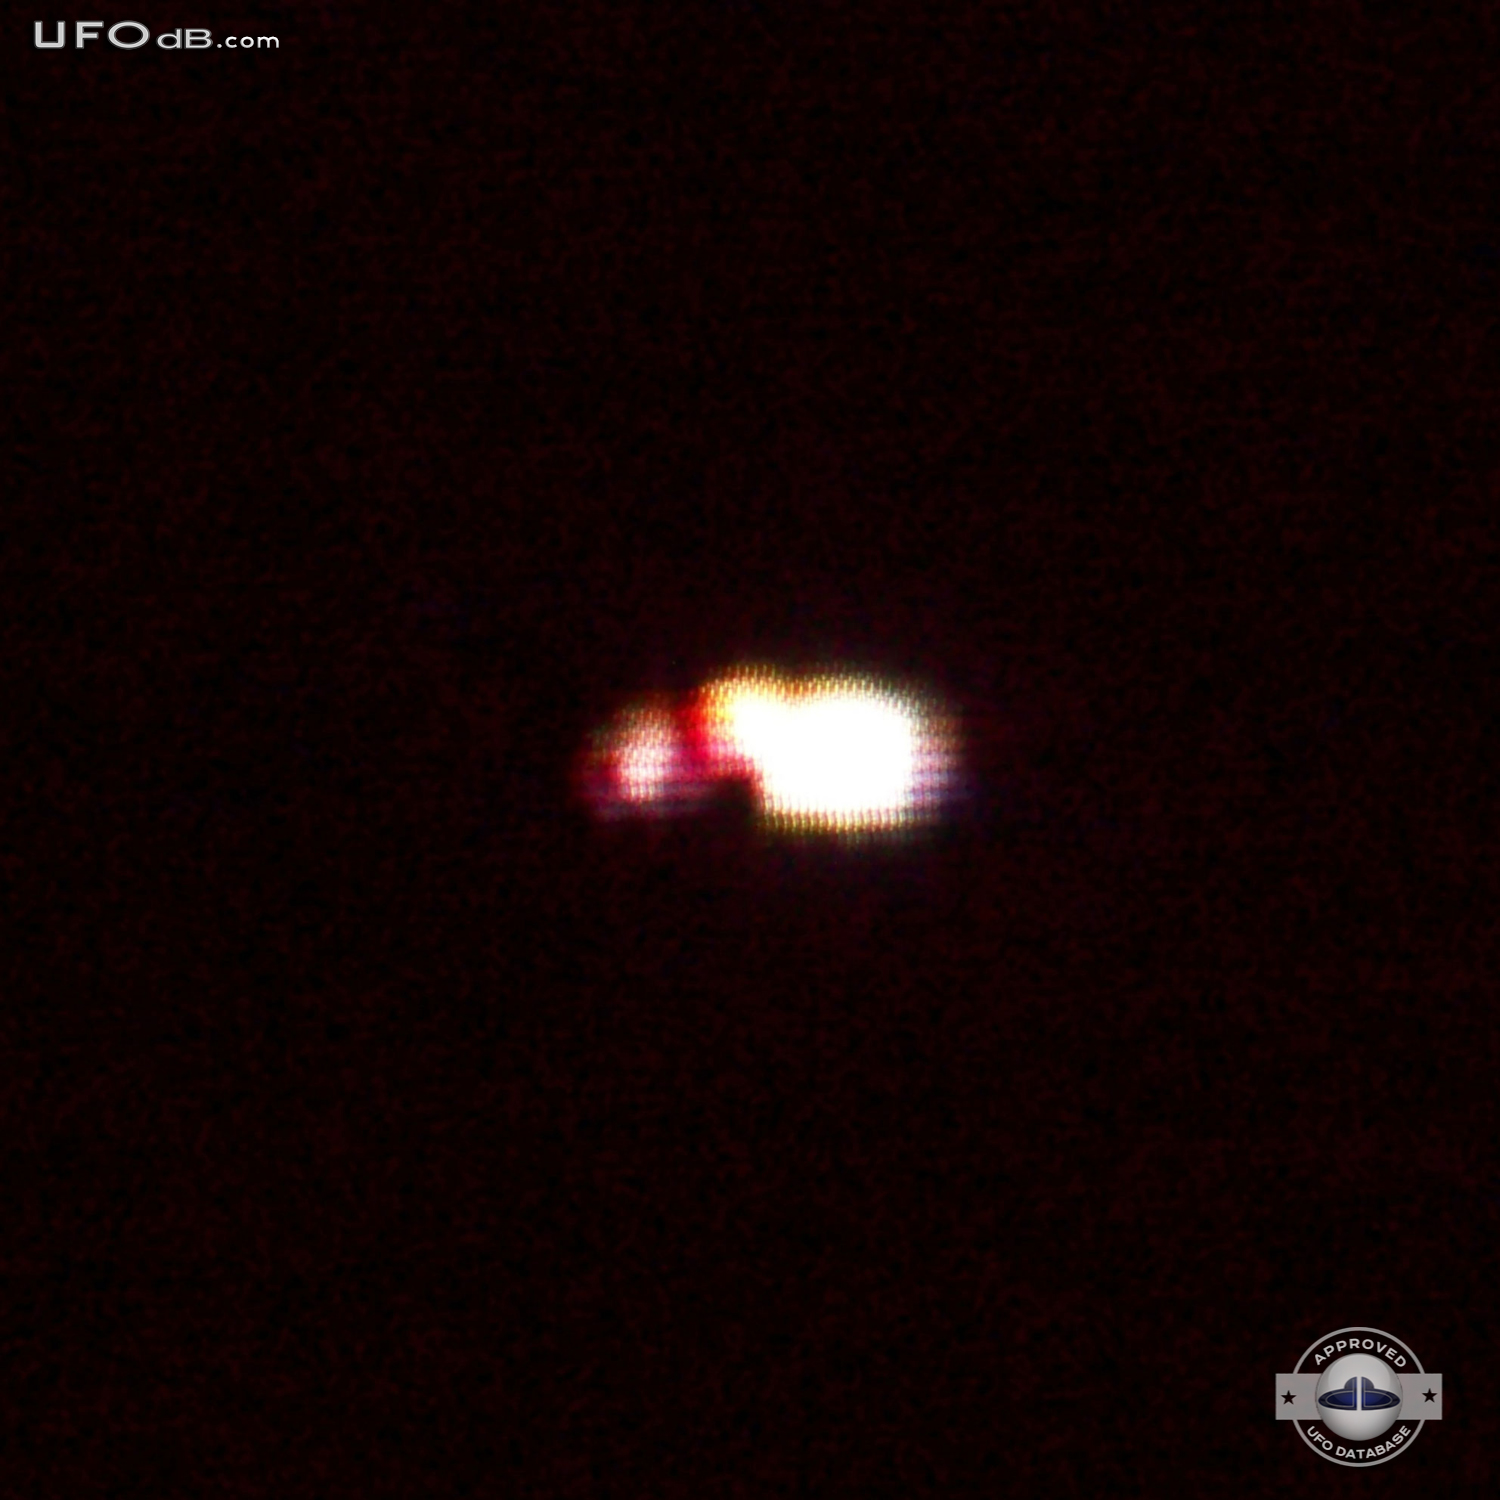 Silently out of nowhere | UFO passing overhead in Kentucky, USA | 2011 UFO Picture #364-1